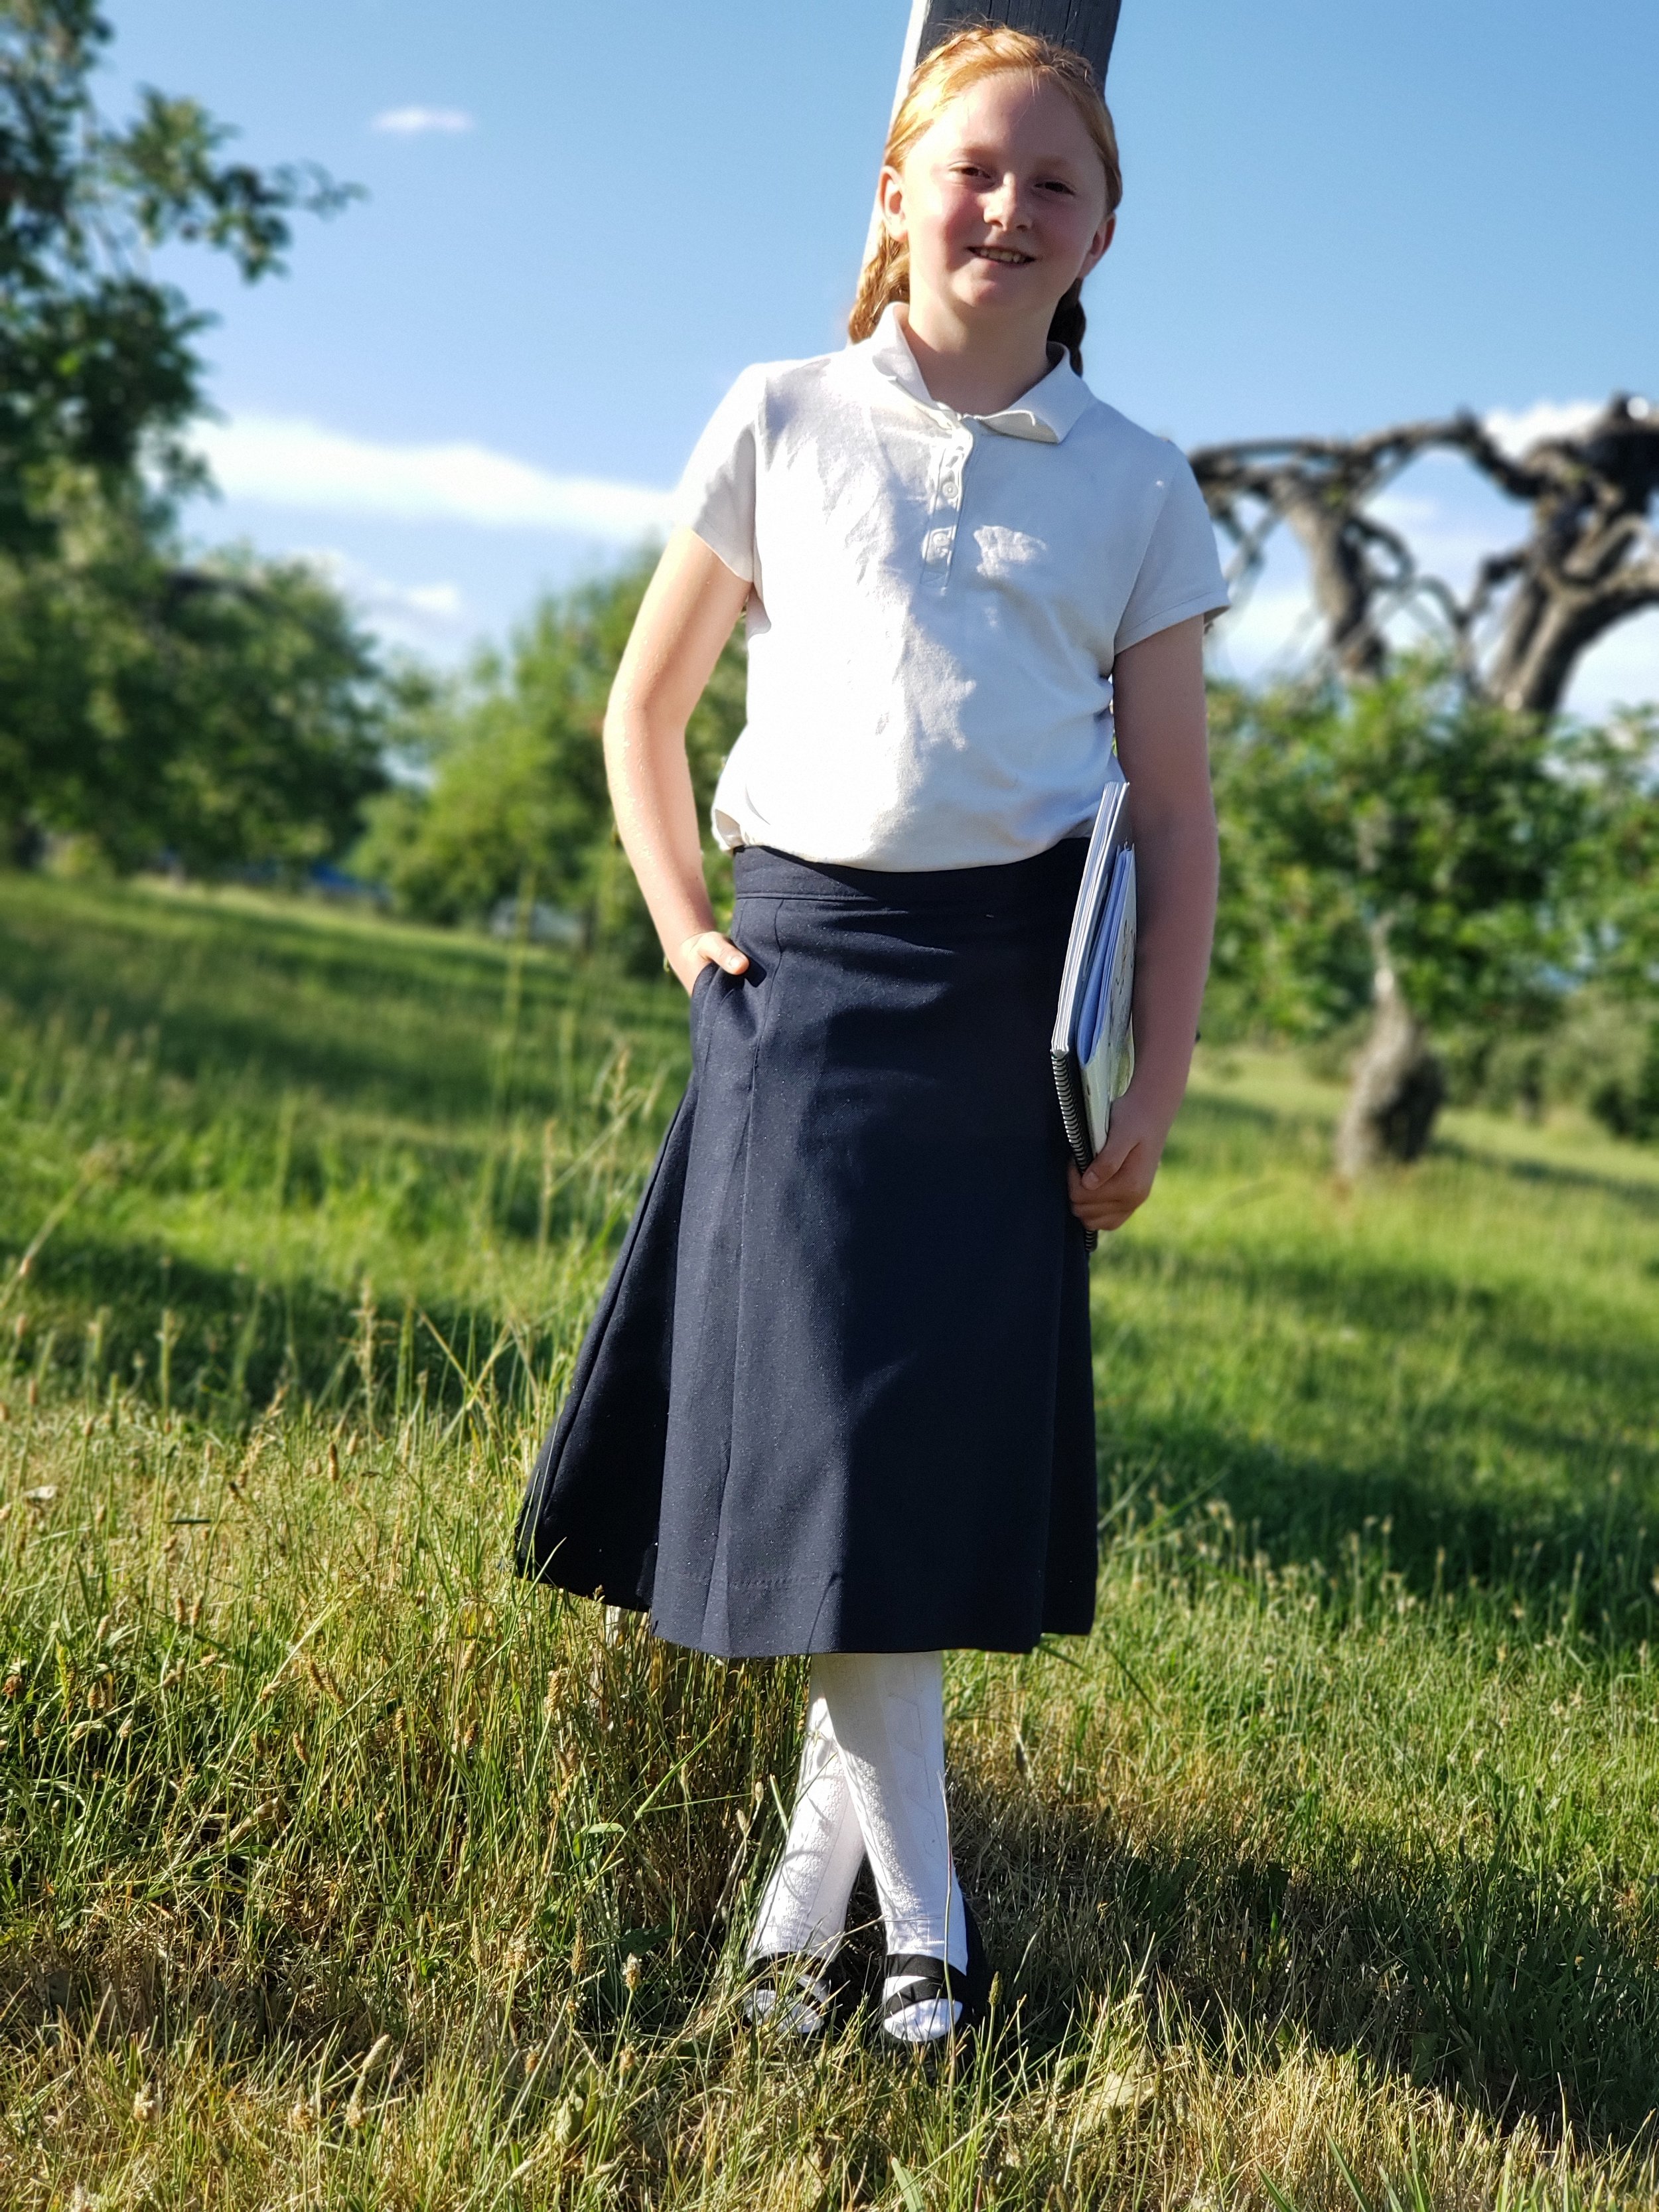 Dominique Navy Skirt (Required) — Academic TradCat uniforms for life